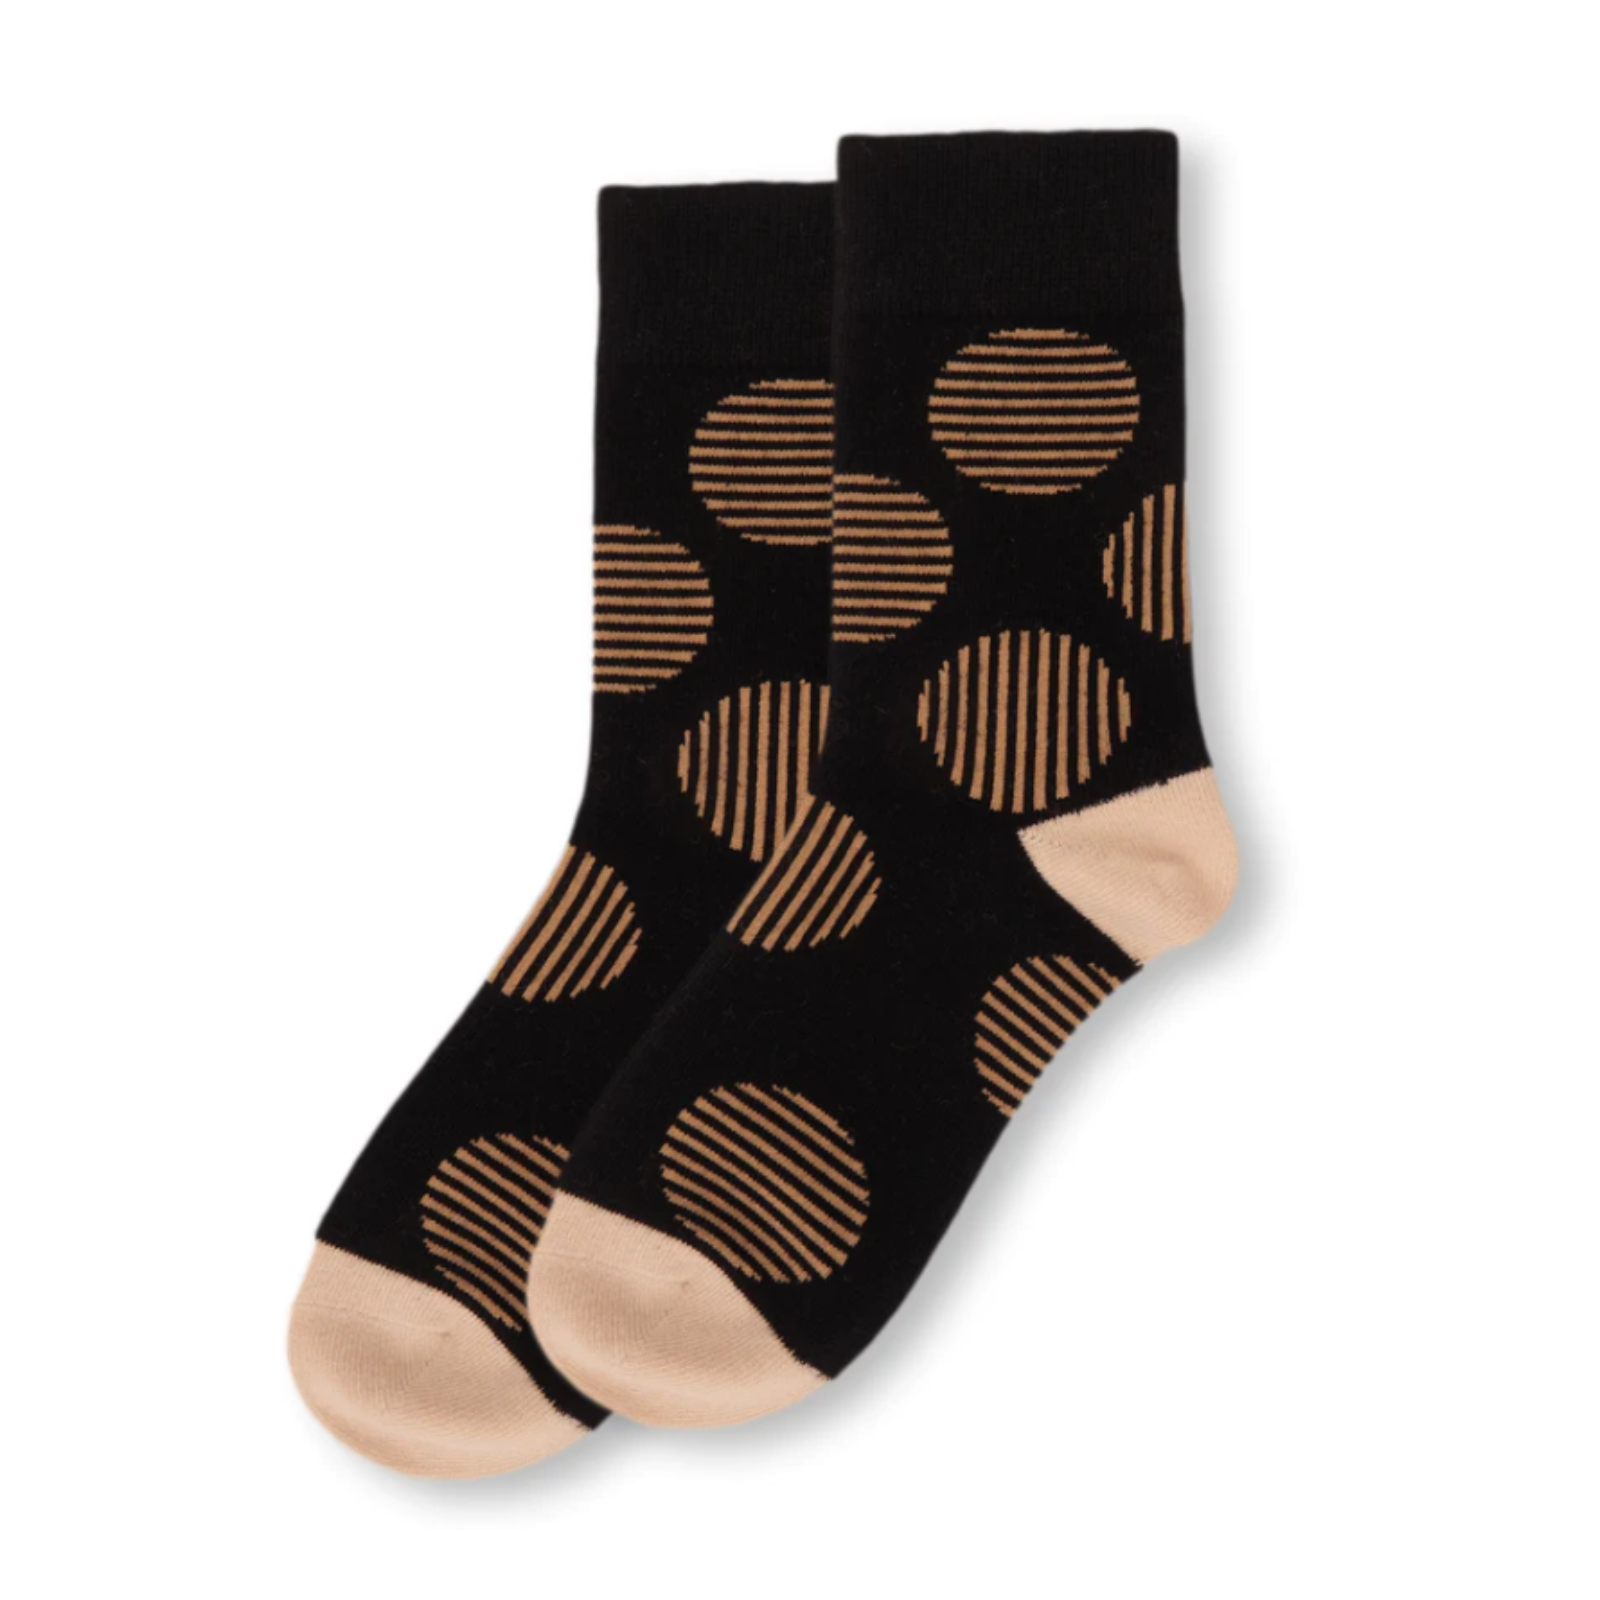 MeMoi Retro Circle women's Crew sock featuring black sock with brown stripes in circle patterns all over. Socks shown on display laying flat. 